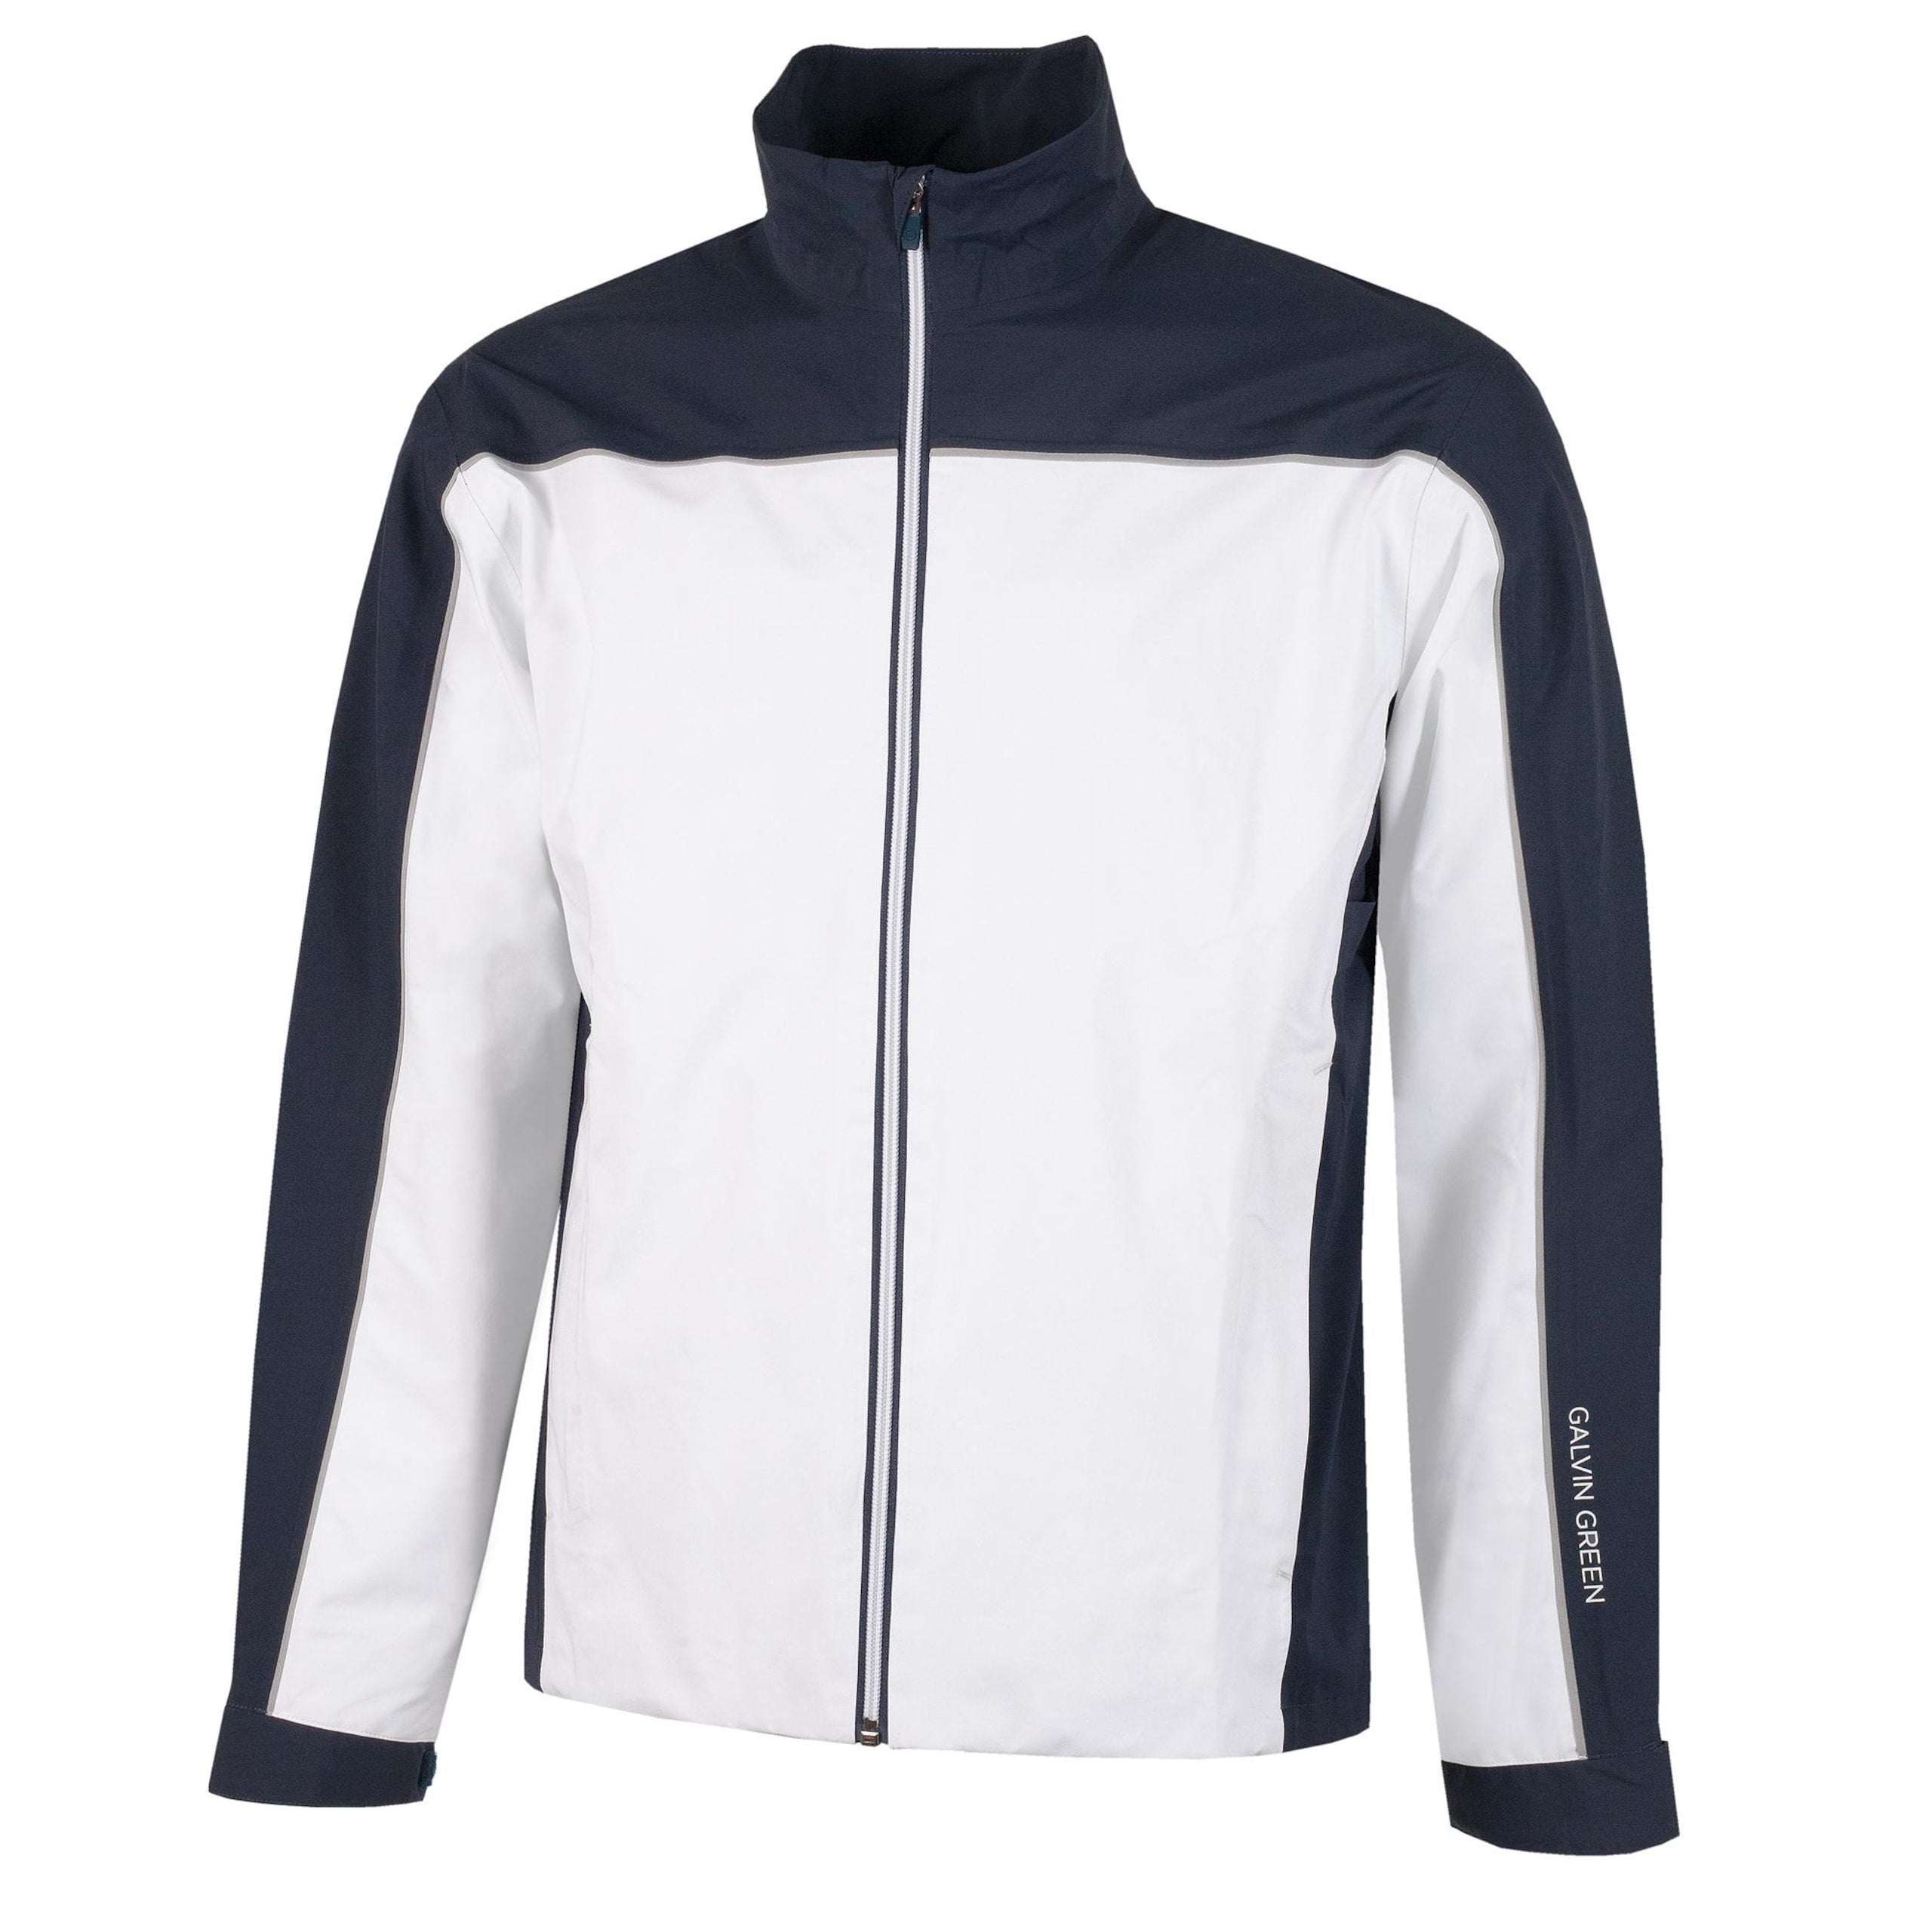 'ACE' GORE-TEX golf jacket with lining.